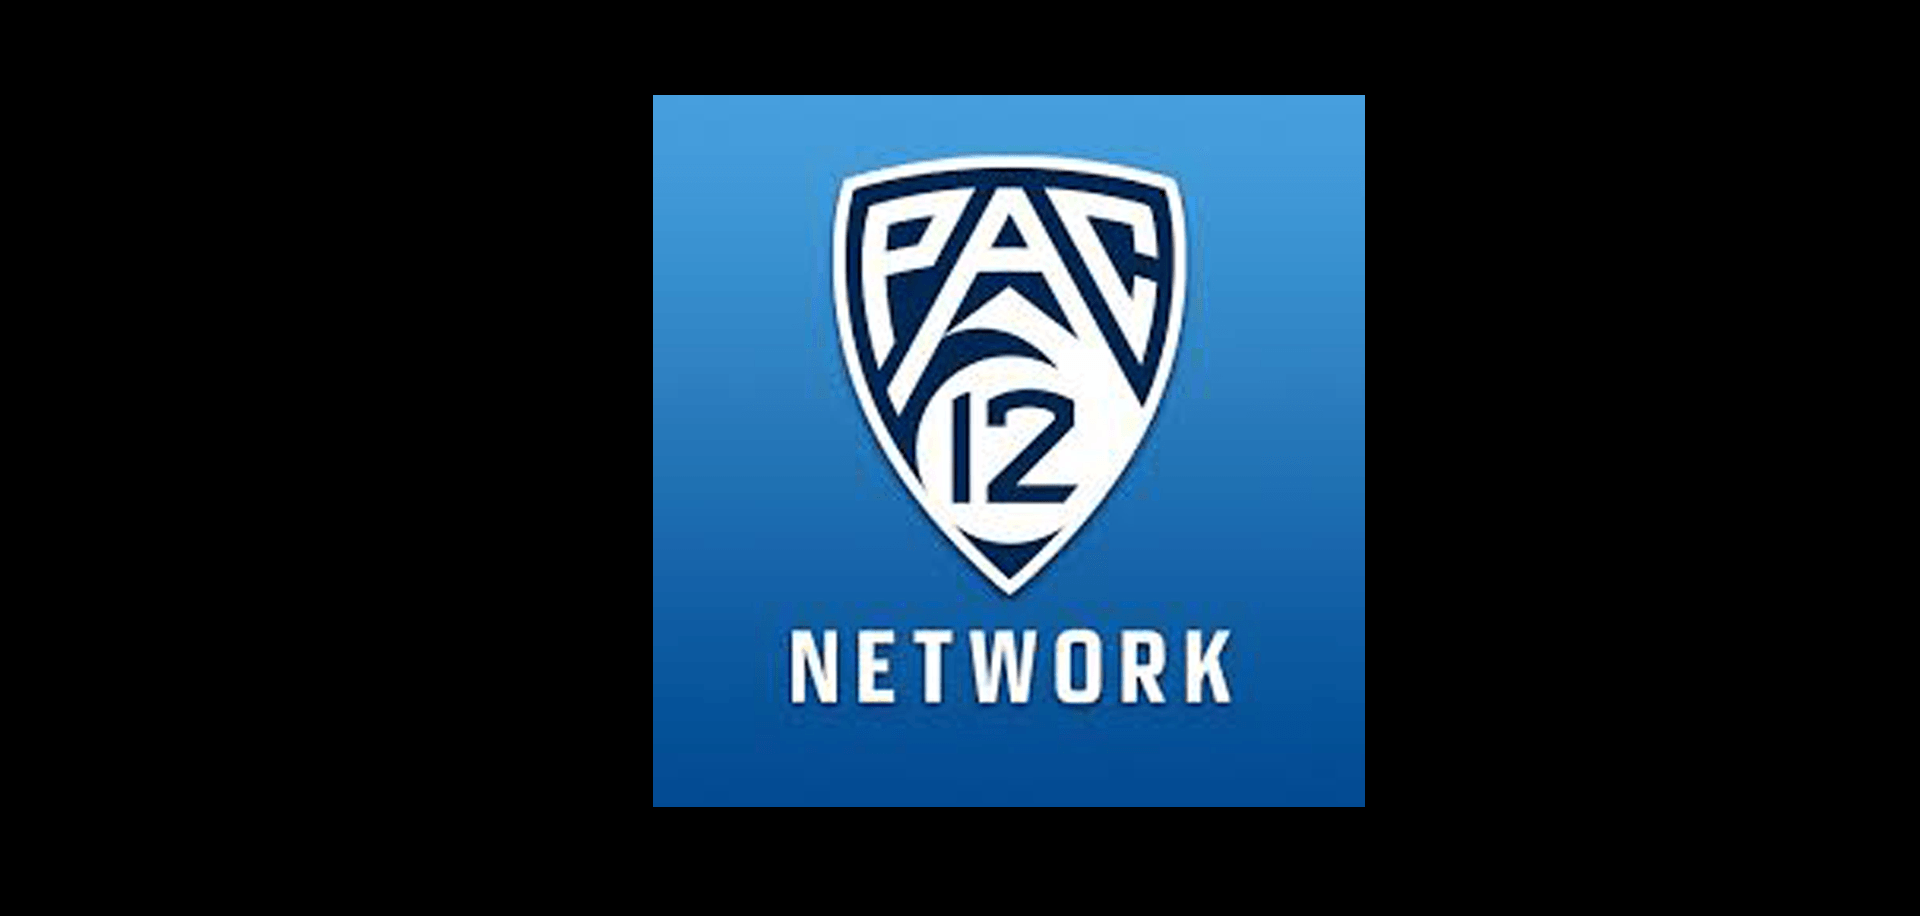 PAC12 Network